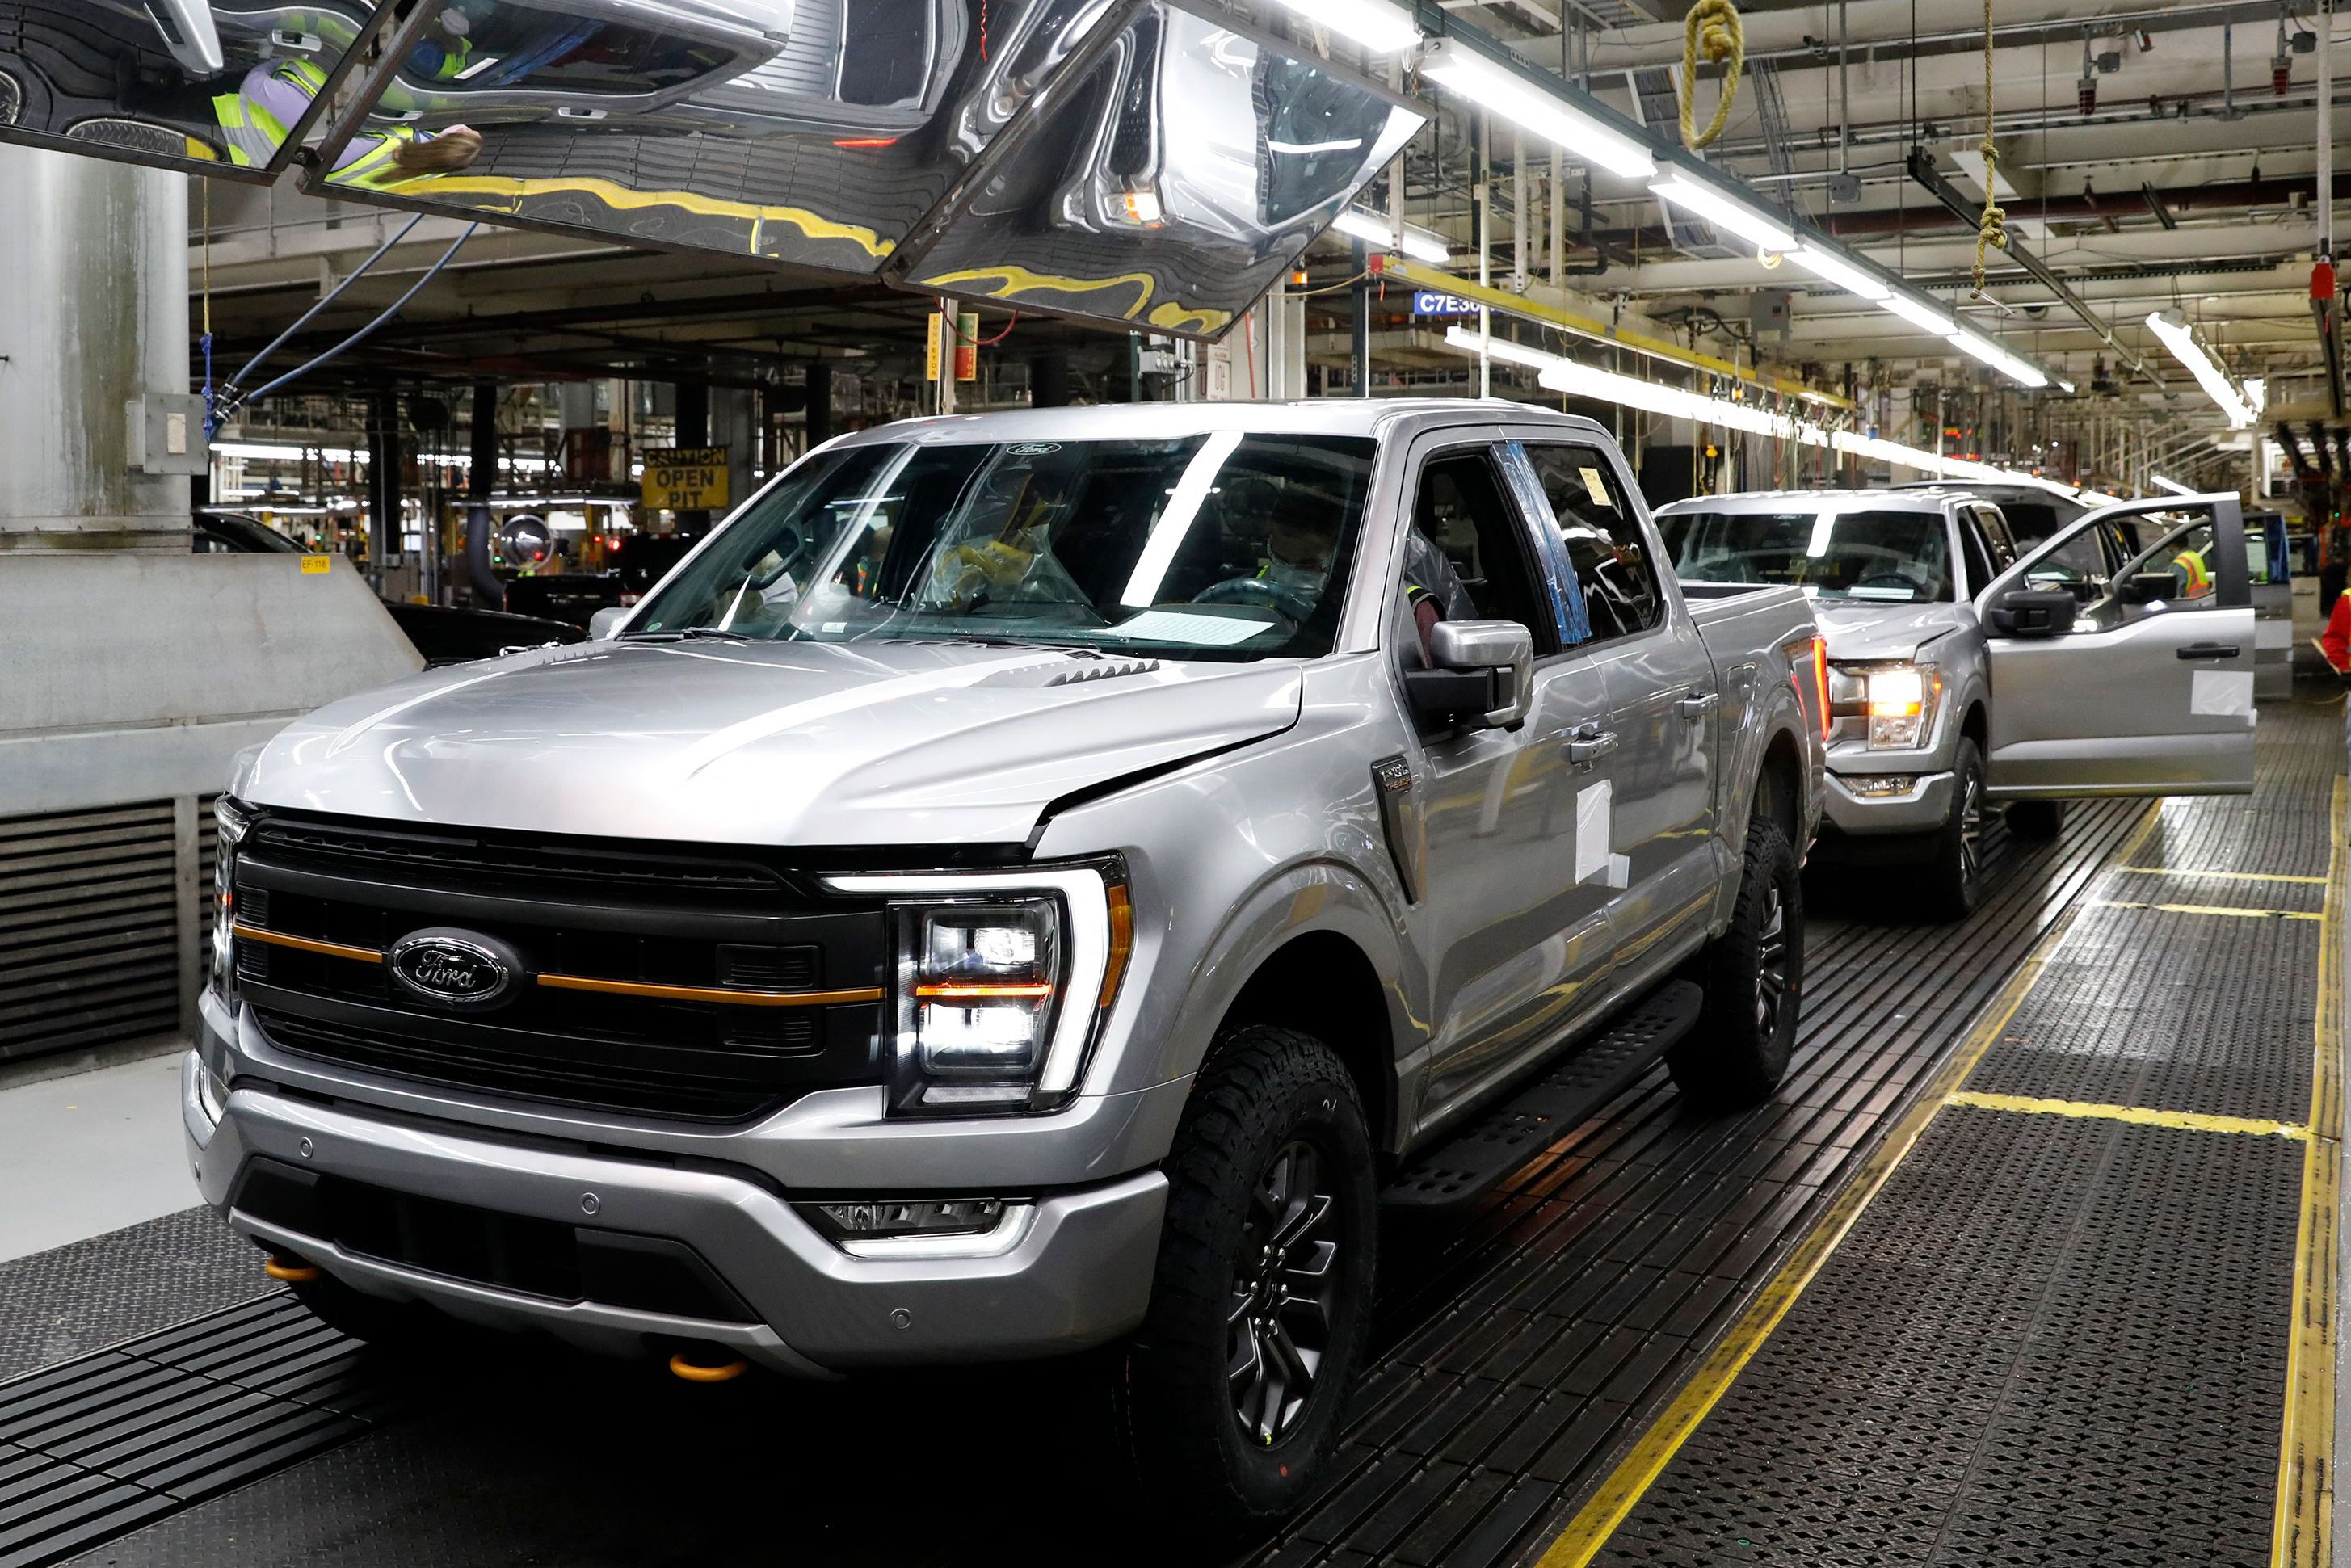 Ford F-150 recall: 112,965 pickup trucks recalled for roll away risk